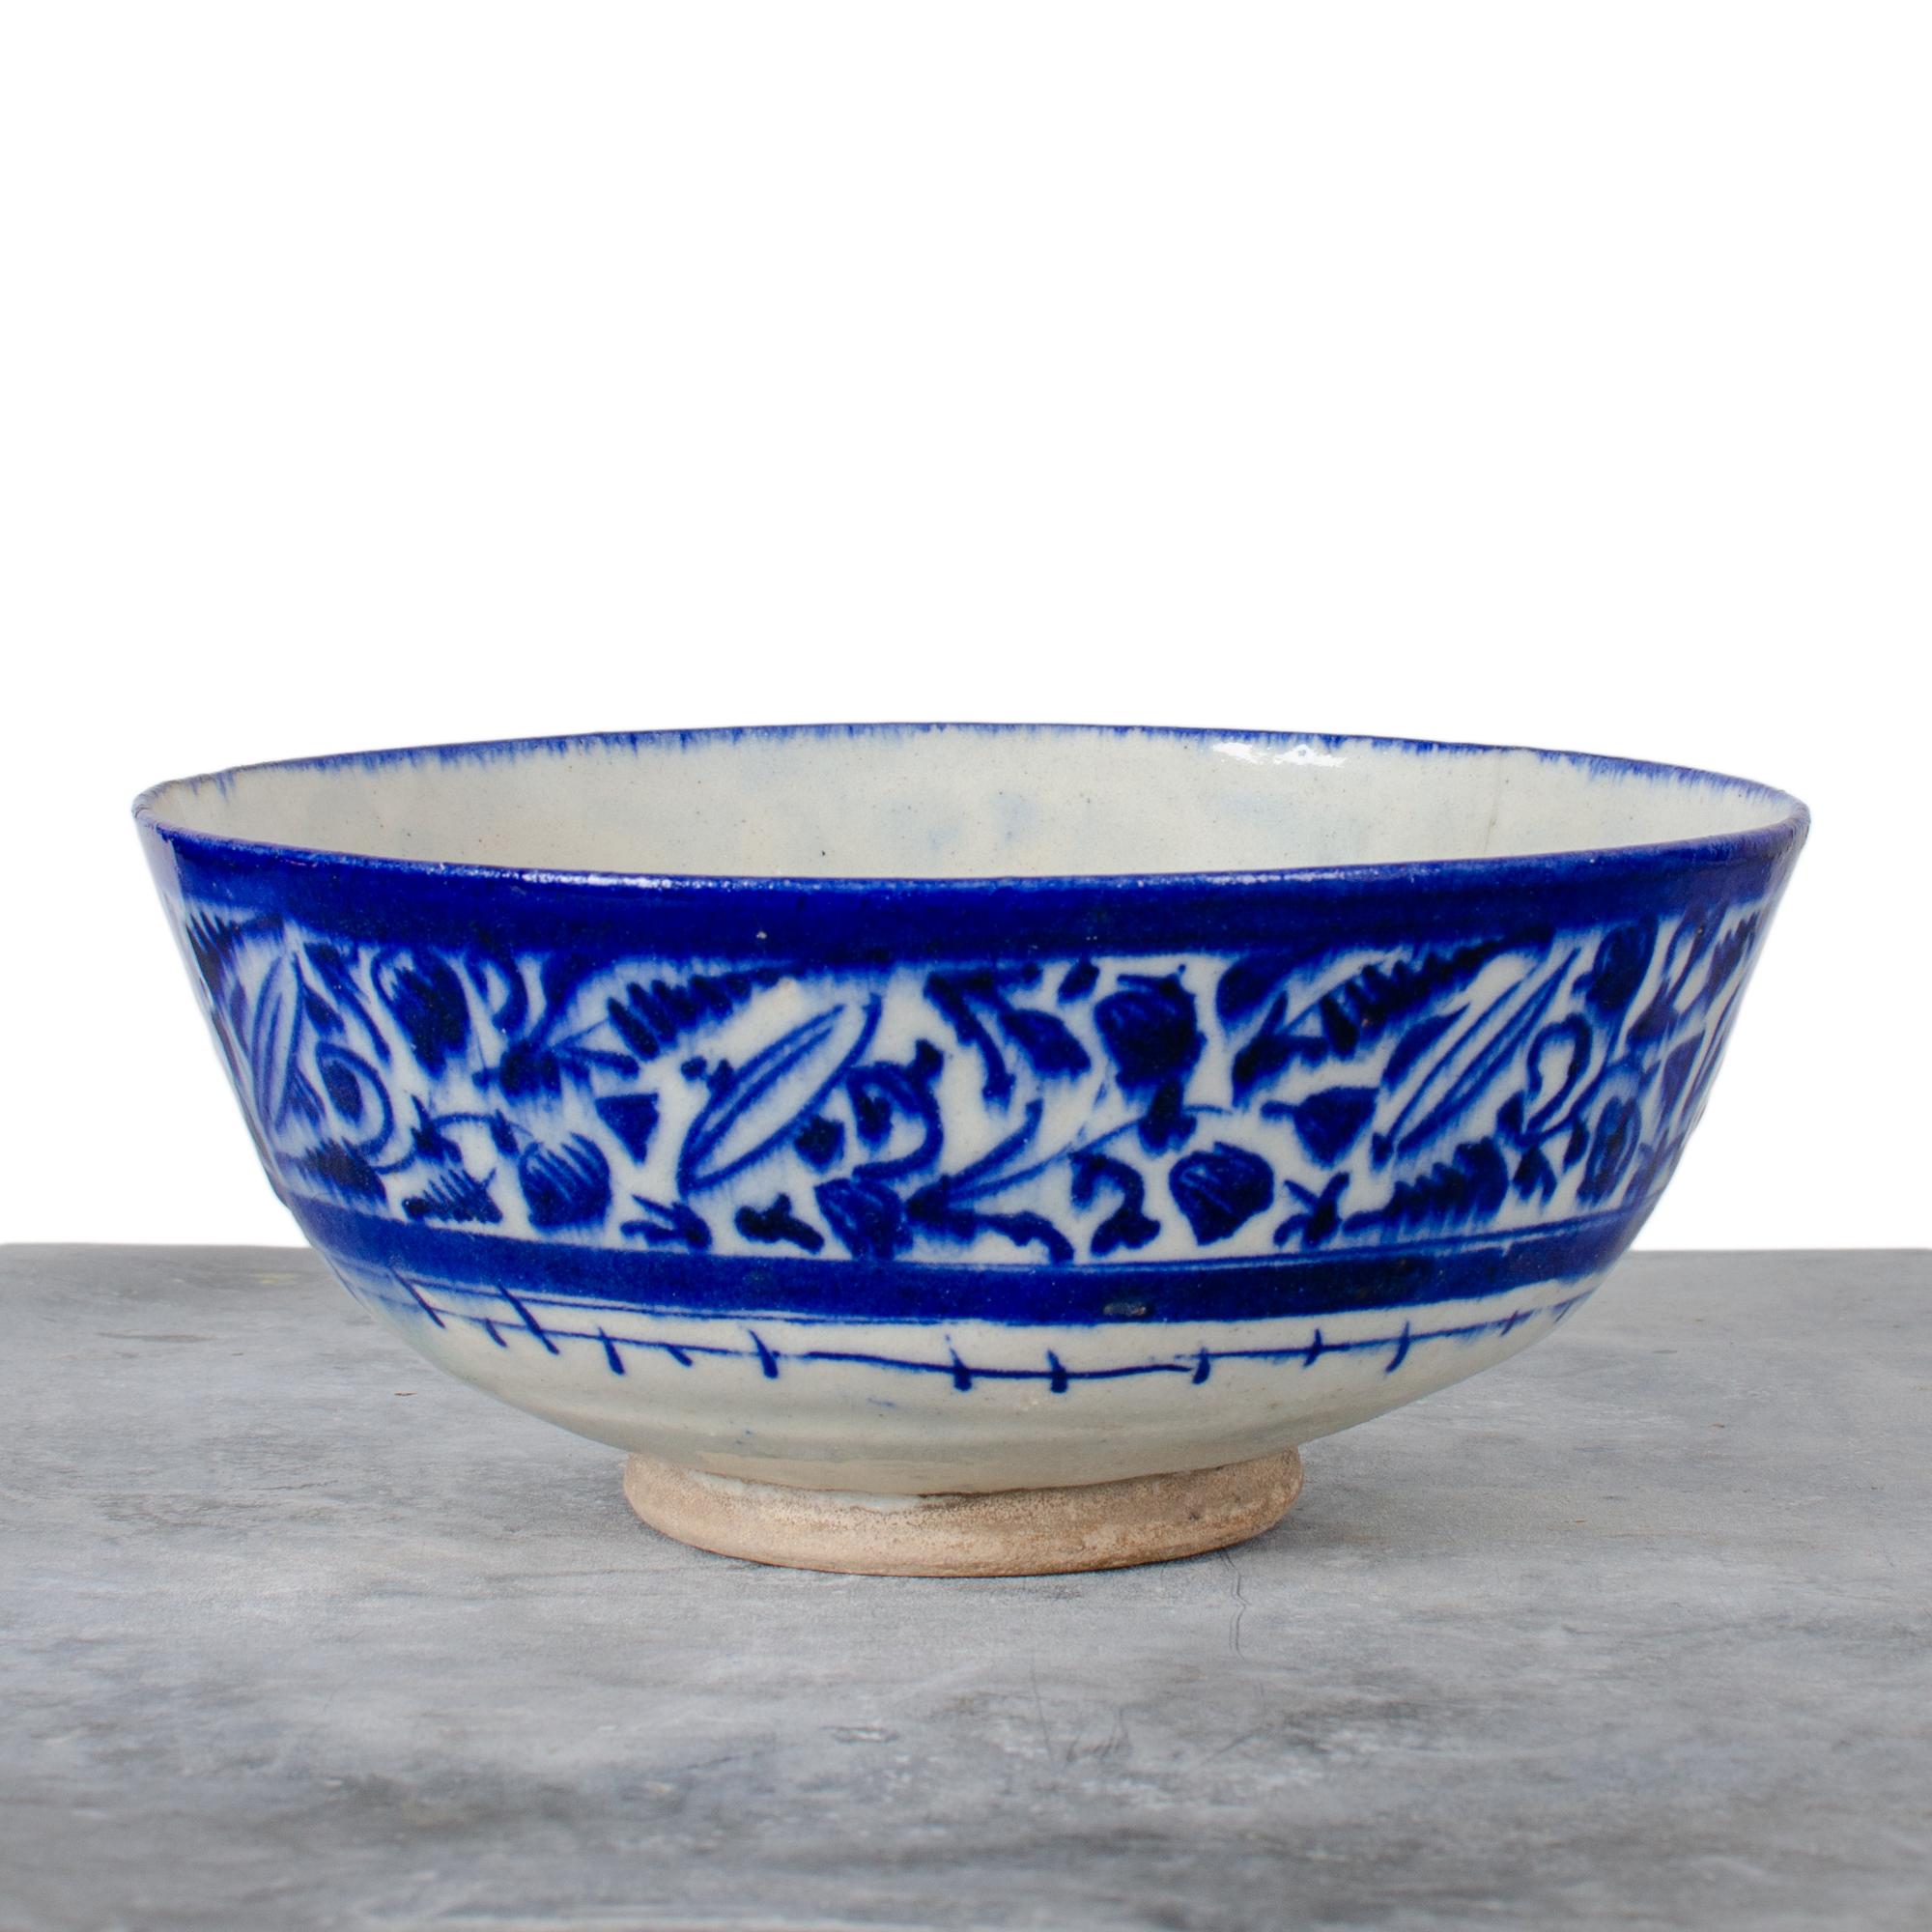 A larger blue and white Safavid period Persian fritware bowl, circa 17th century. 

9 inches wide by 4 inches tall